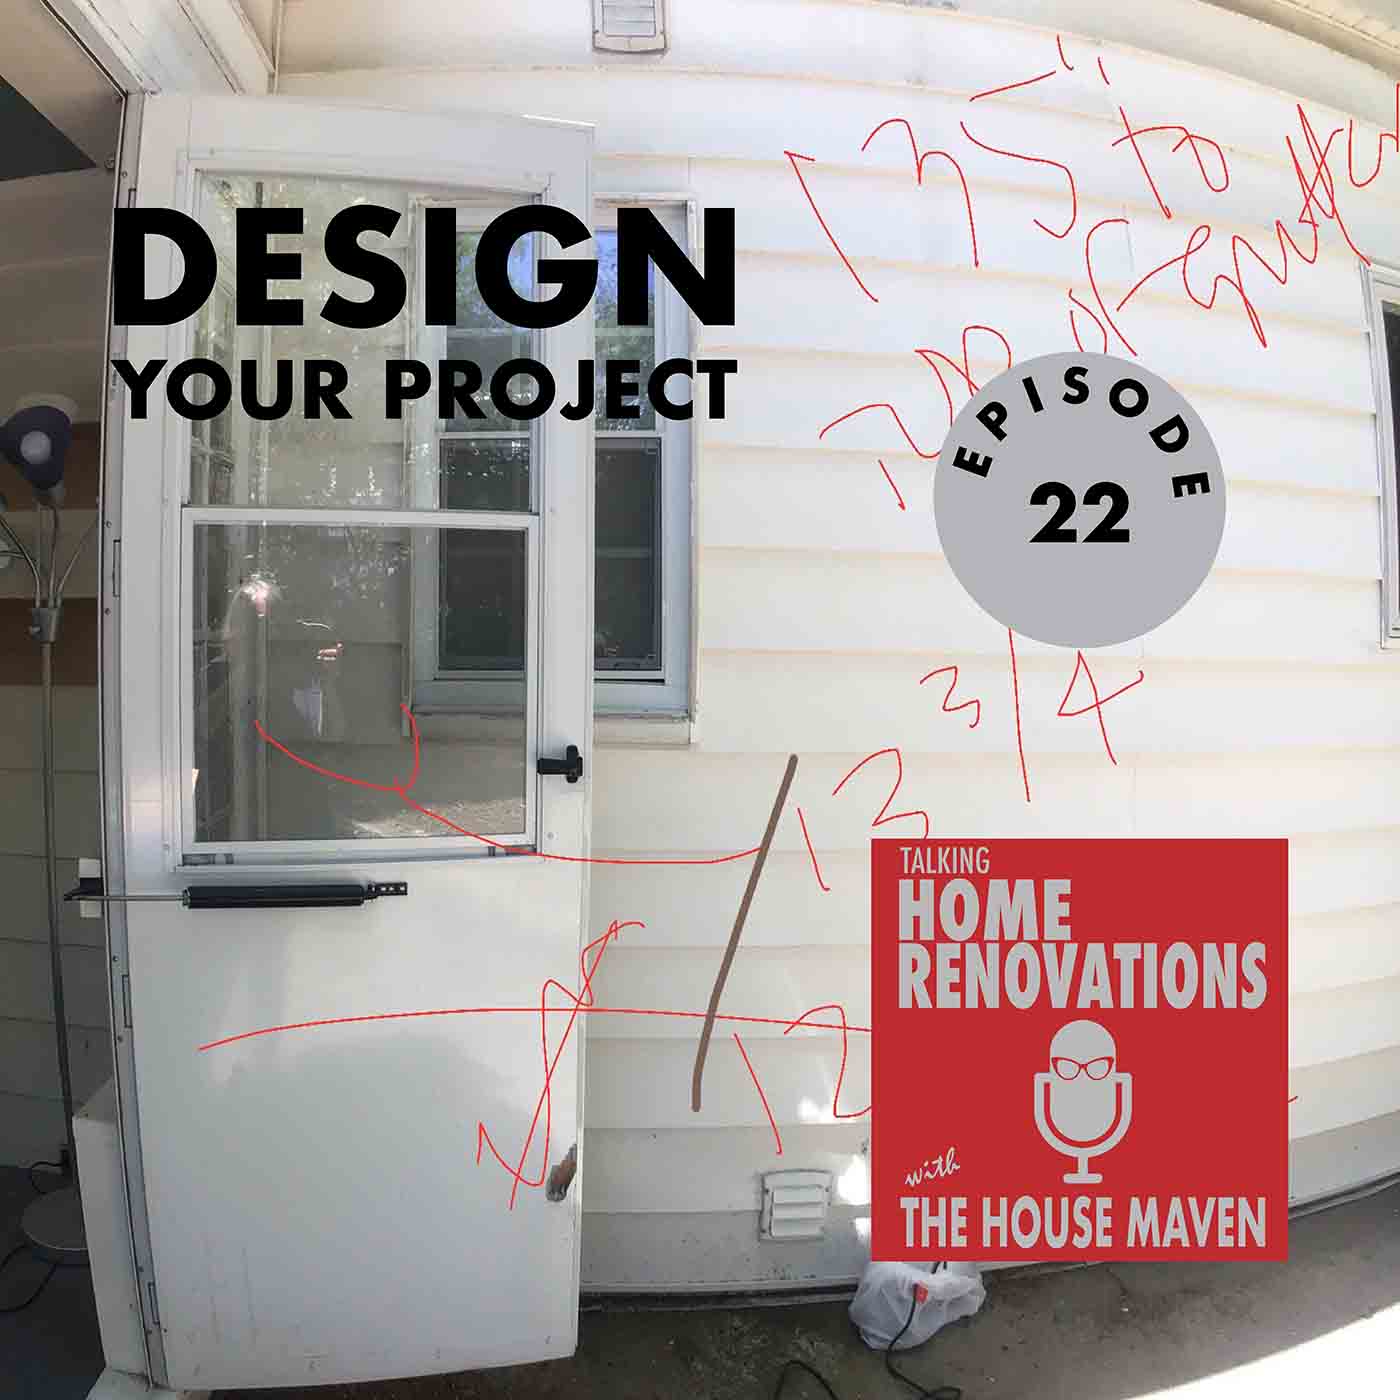 Design your project